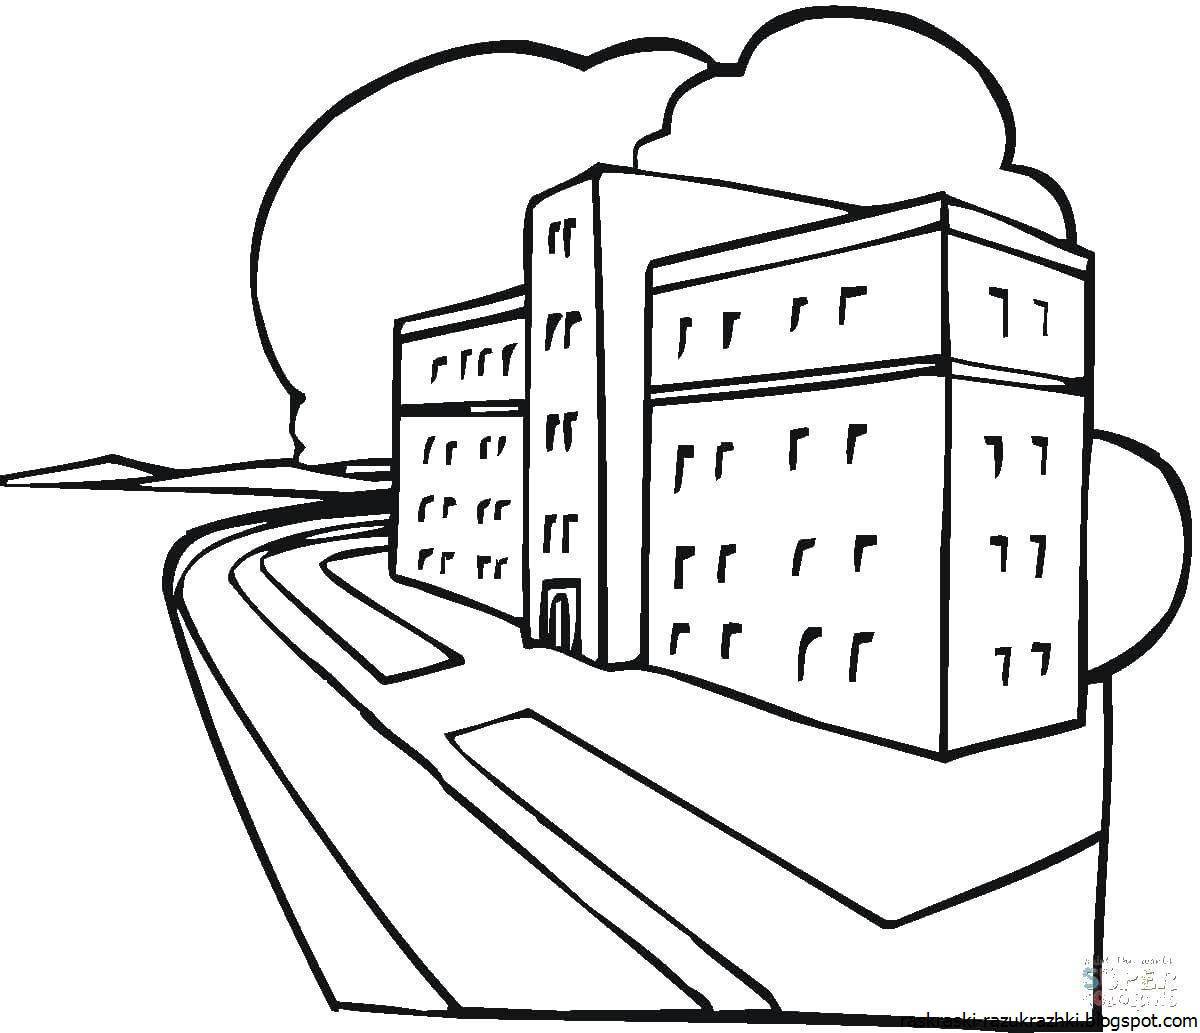 Inviting city coloring pages for kids